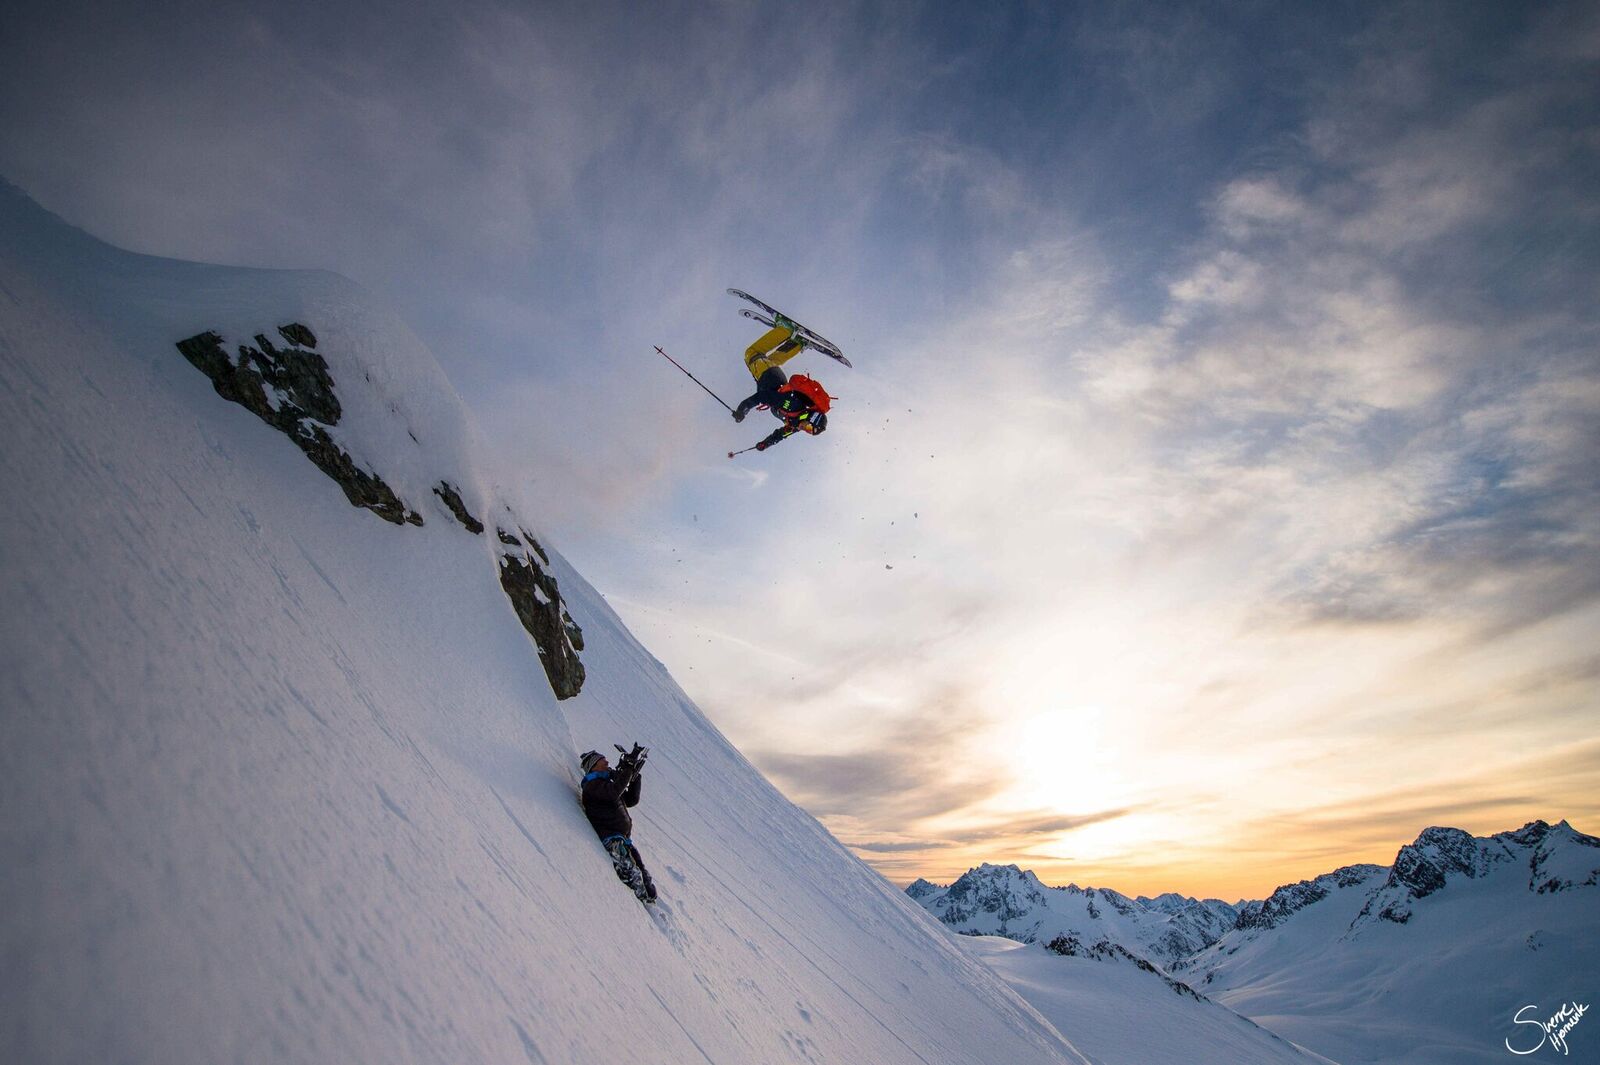 Push your limits on some of the wildest terrain Alaska has to offer.